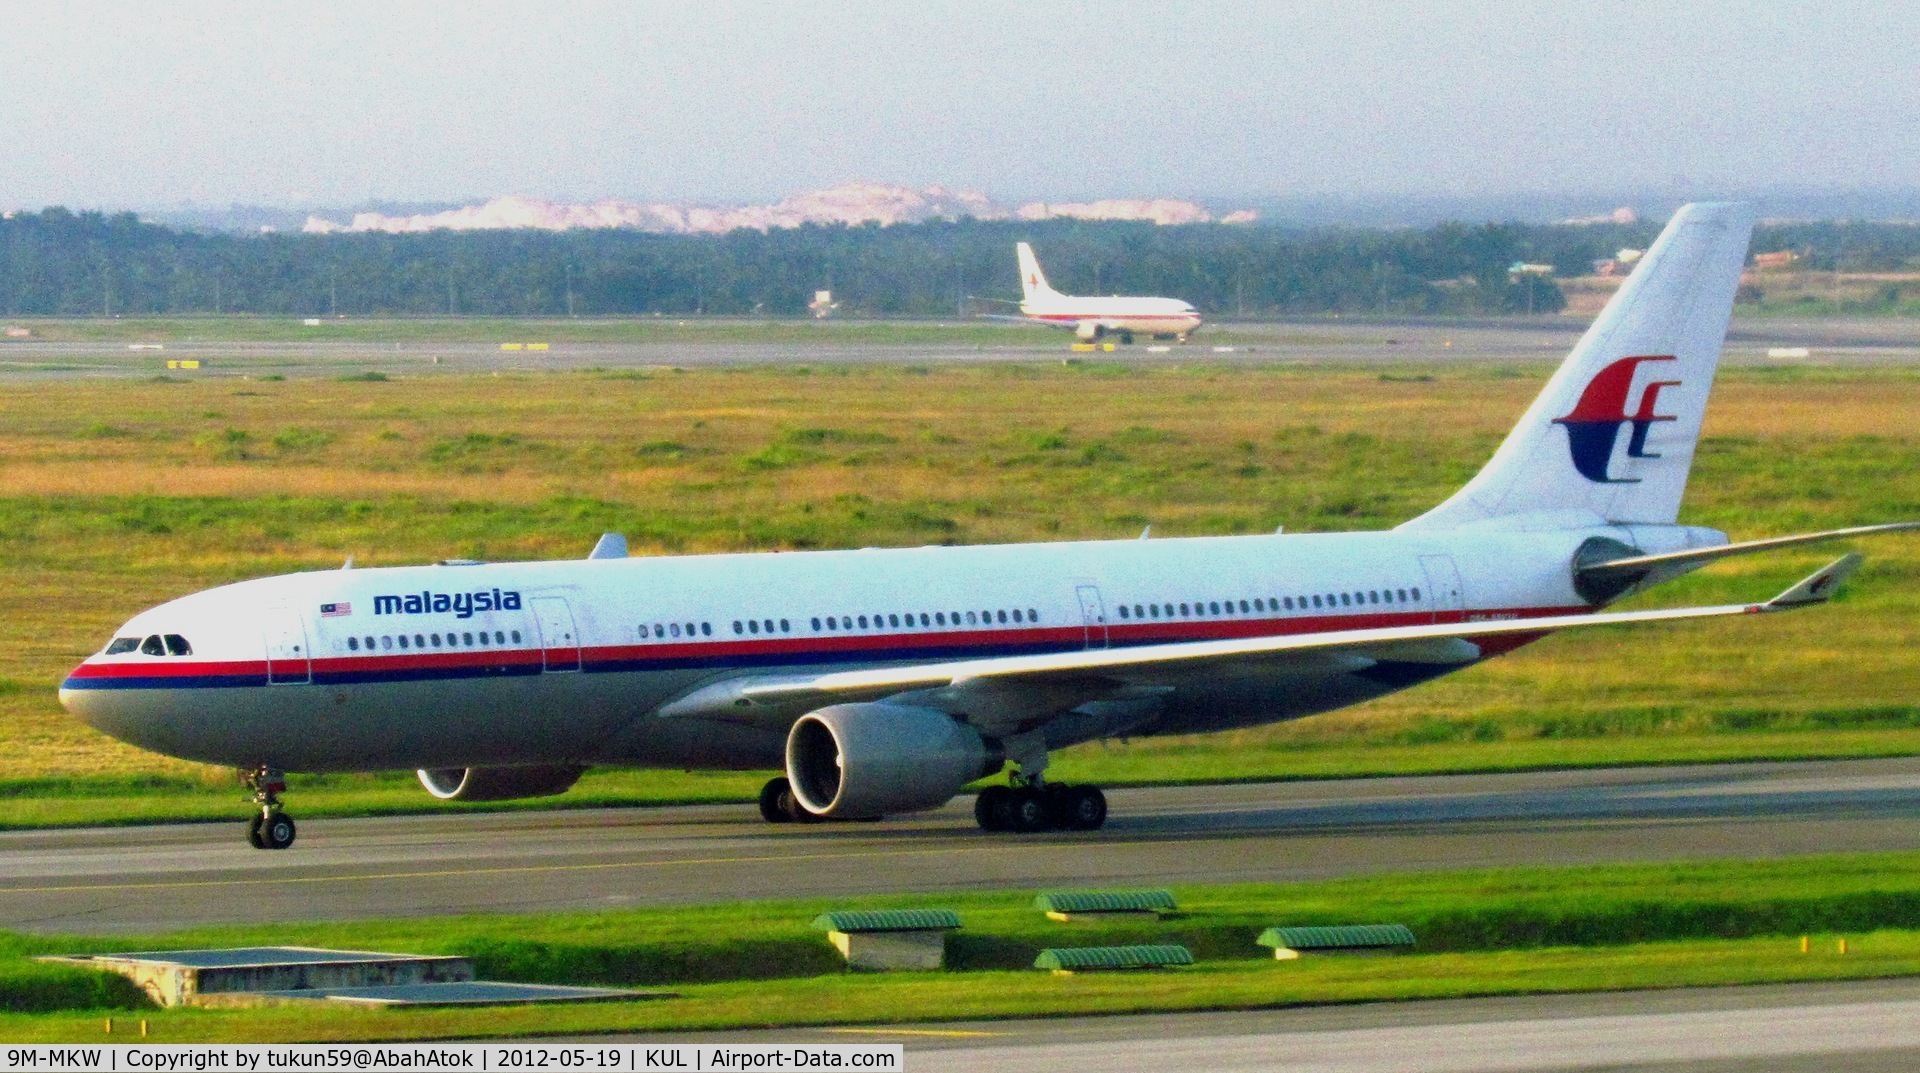 9M-MKW, 1999 Airbus A330-223 C/N 300, Malaysia Airlines